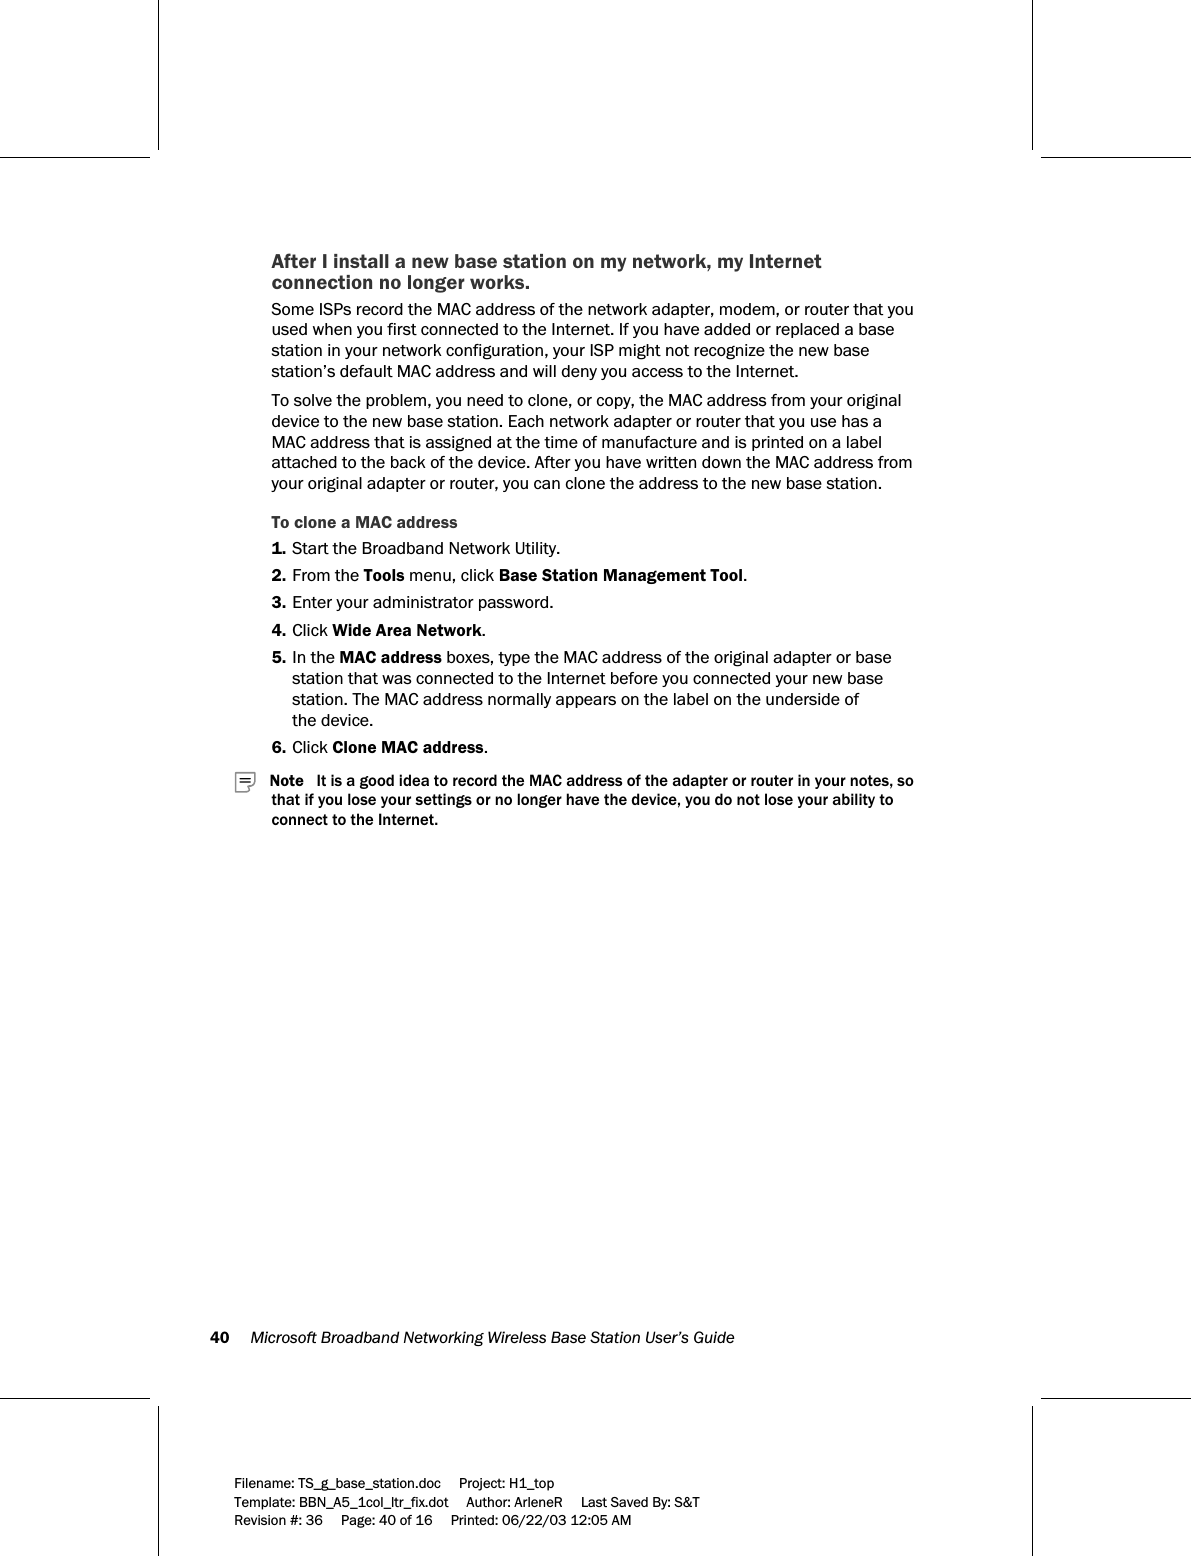 40     Microsoft Broadband Networking Wireless Base Station User’s Guide  Filename: TS_g_base_station.doc     Project: H1_top    Template: BBN_A5_1col_ltr_fix.dot     Author: ArleneR     Last Saved By: S&amp;T Revision #: 36     Page: 40 of 16     Printed: 06/22/03 12:05 AM  After I install a new base station on my network, my Internet connection no longer works. Some ISPs record the MAC address of the network adapter, modem, or router that you used when you first connected to the Internet. If you have added or replaced a base station in your network configuration, your ISP might not recognize the new base station’s default MAC address and will deny you access to the Internet.  To solve the problem, you need to clone, or copy, the MAC address from your original device to the new base station. Each network adapter or router that you use has a MAC address that is assigned at the time of manufacture and is printed on a label attached to the back of the device. After you have written down the MAC address from your original adapter or router, you can clone the address to the new base station. To clone a MAC address  1. Start the Broadband Network Utility. 2. From the Tools menu, click Base Station Management Tool. 3. Enter your administrator password. 4. Click Wide Area Network.  5. In the MAC address boxes, type the MAC address of the original adapter or base station that was connected to the Internet before you connected your new base station. The MAC address normally appears on the label on the underside of  the device.   6. Click Clone MAC address.      Note   It is a good idea to record the MAC address of the adapter or router in your notes, so that if you lose your settings or no longer have the device, you do not lose your ability to connect to the Internet. 